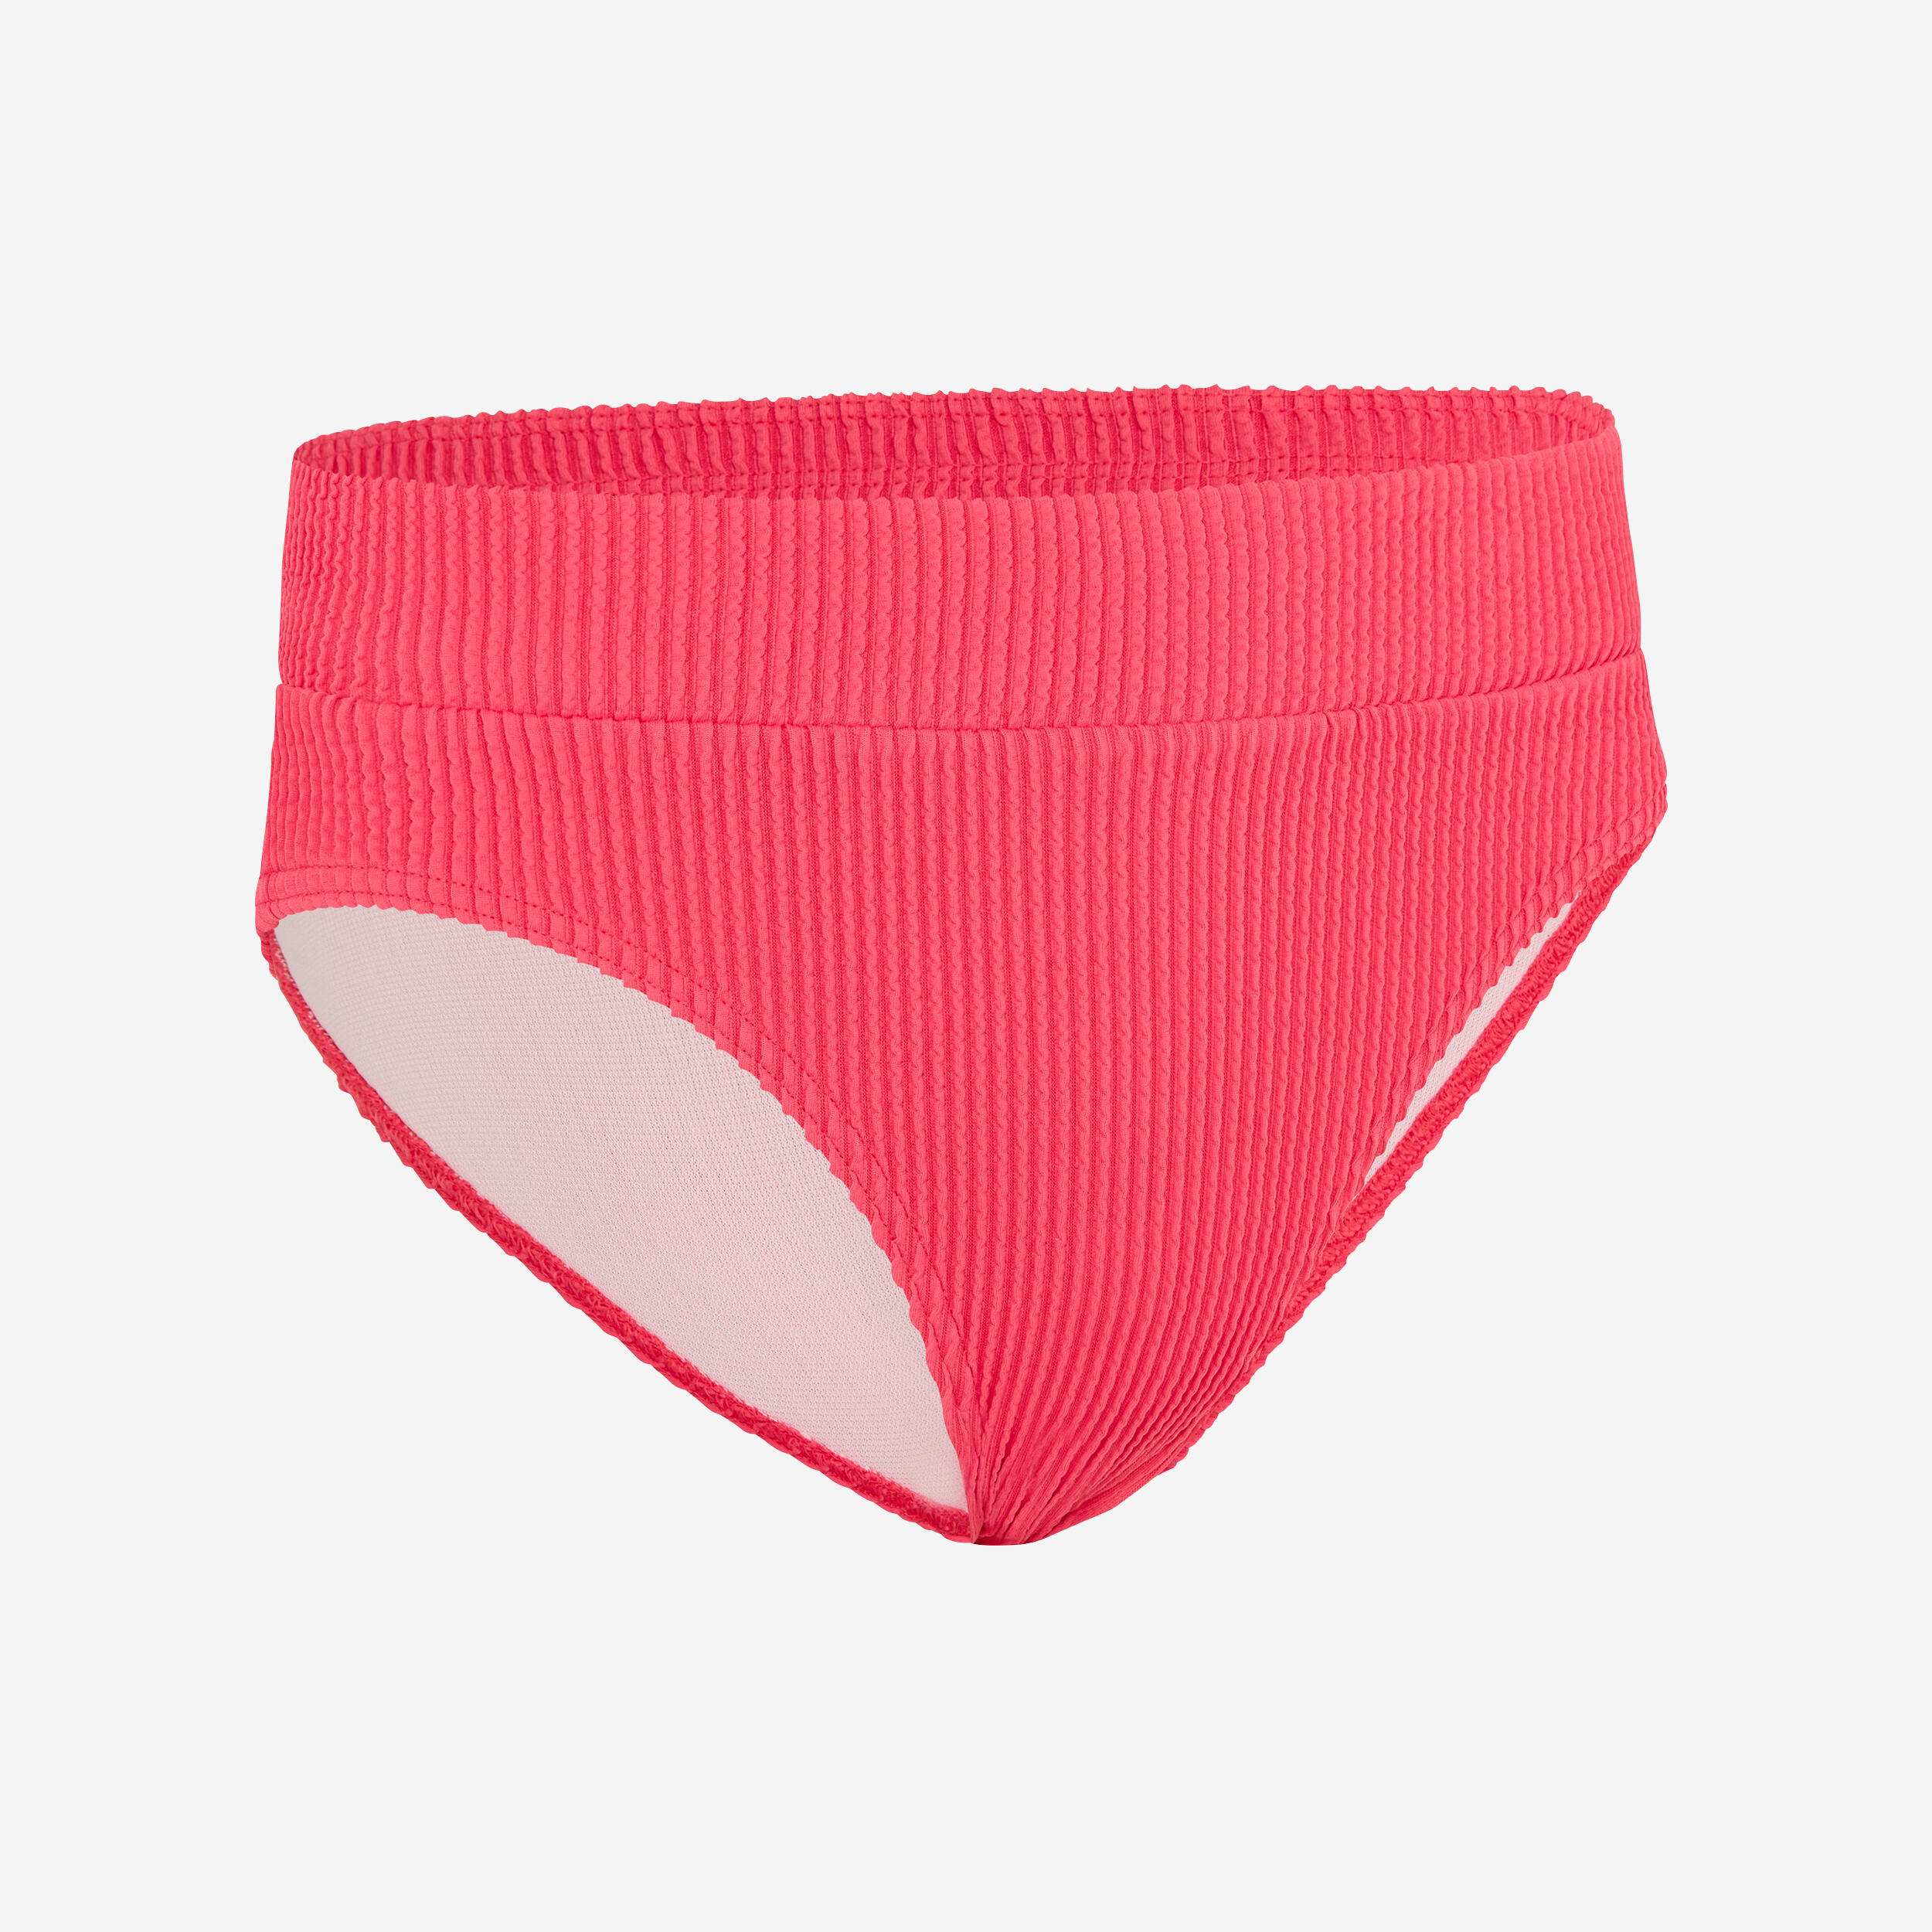 GIRL'S HIGH-WAISTED BAO SWIMSUIT BOTTOMS 500 STRAWBERRY 1/4